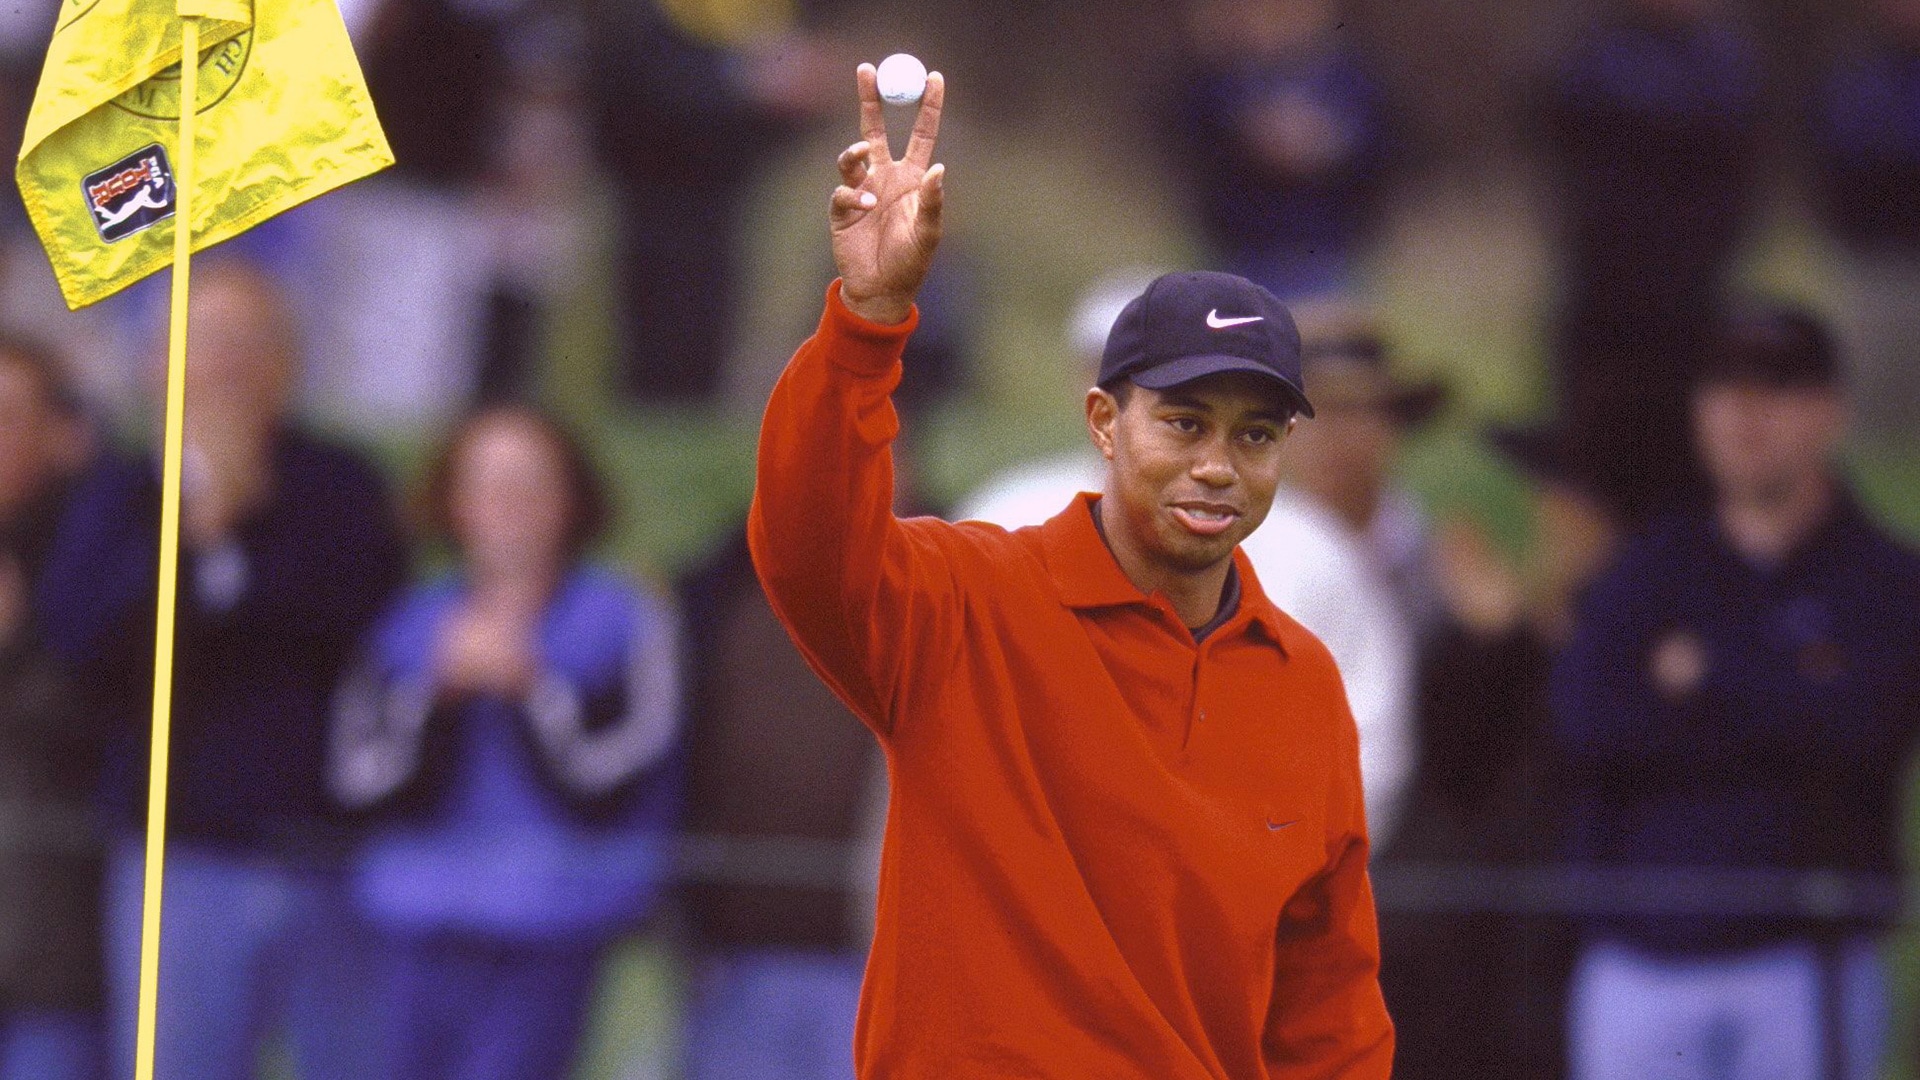 Memorable moments from Pebble Beach: Tiger’s heroics, Spieth’s danger, snow day